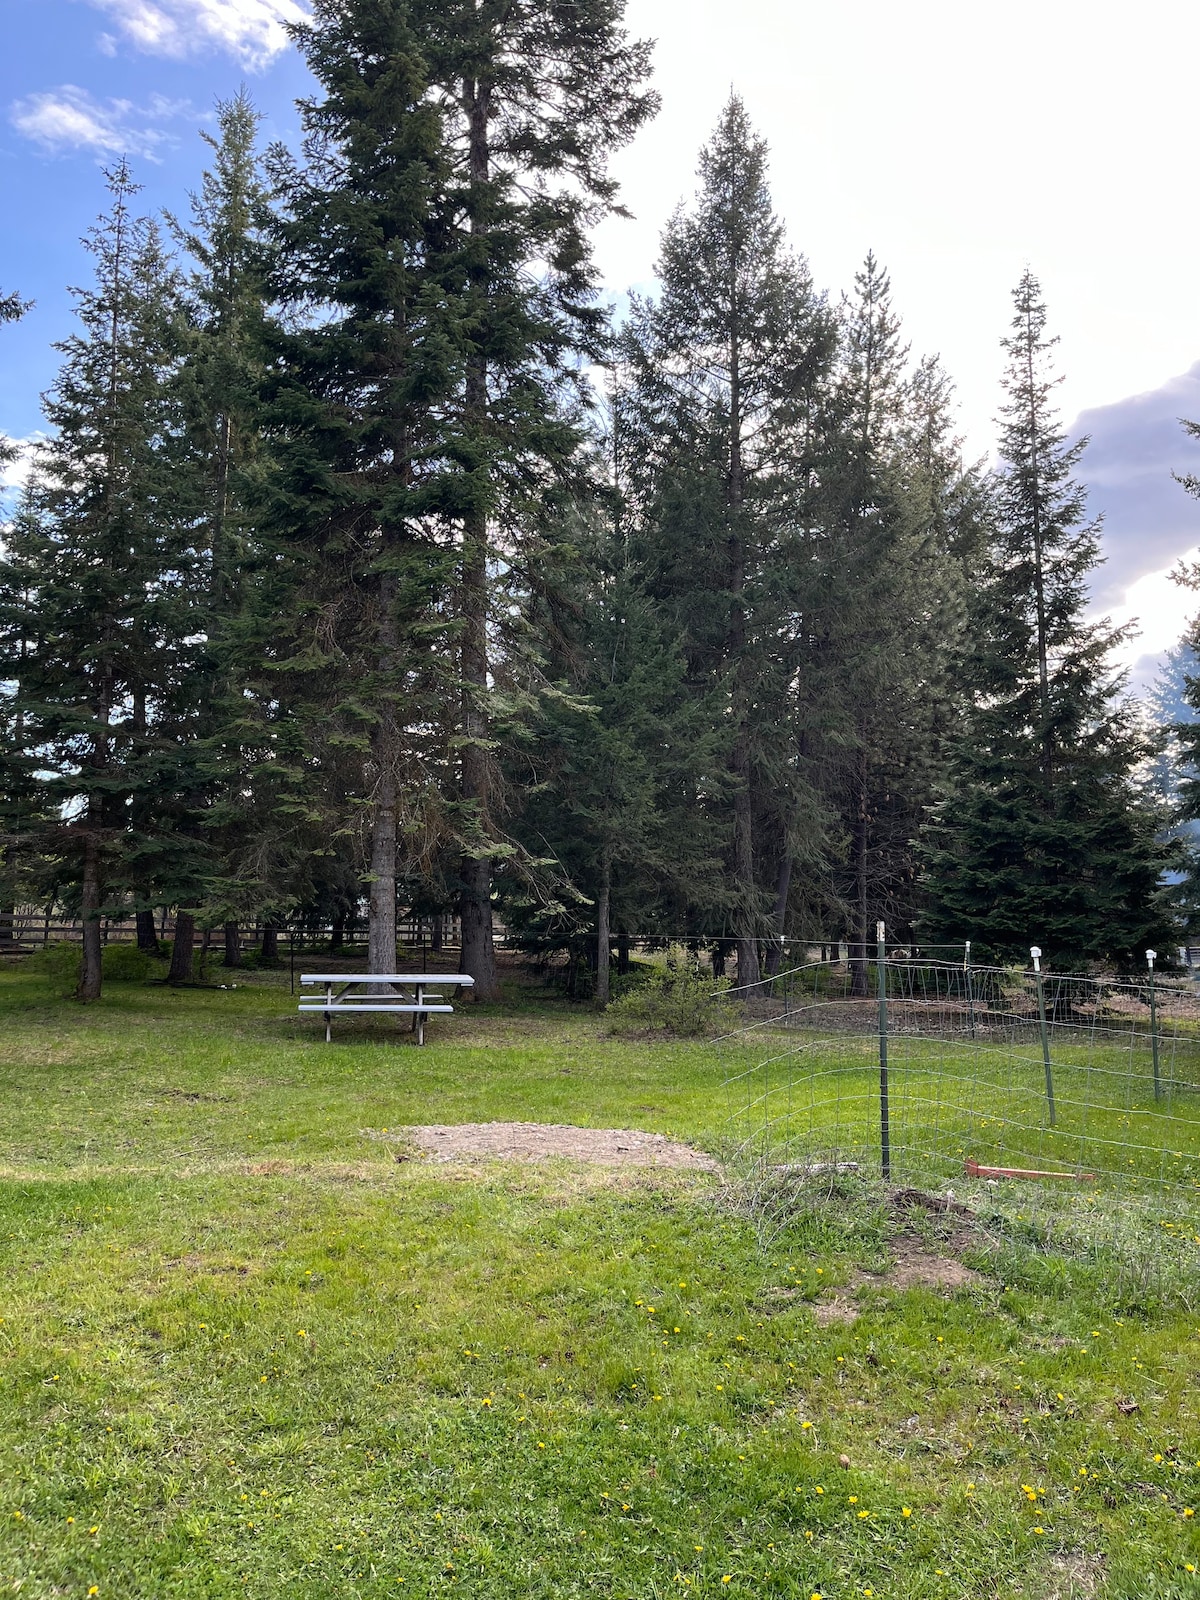 Campsite in Athol, ID- The Field